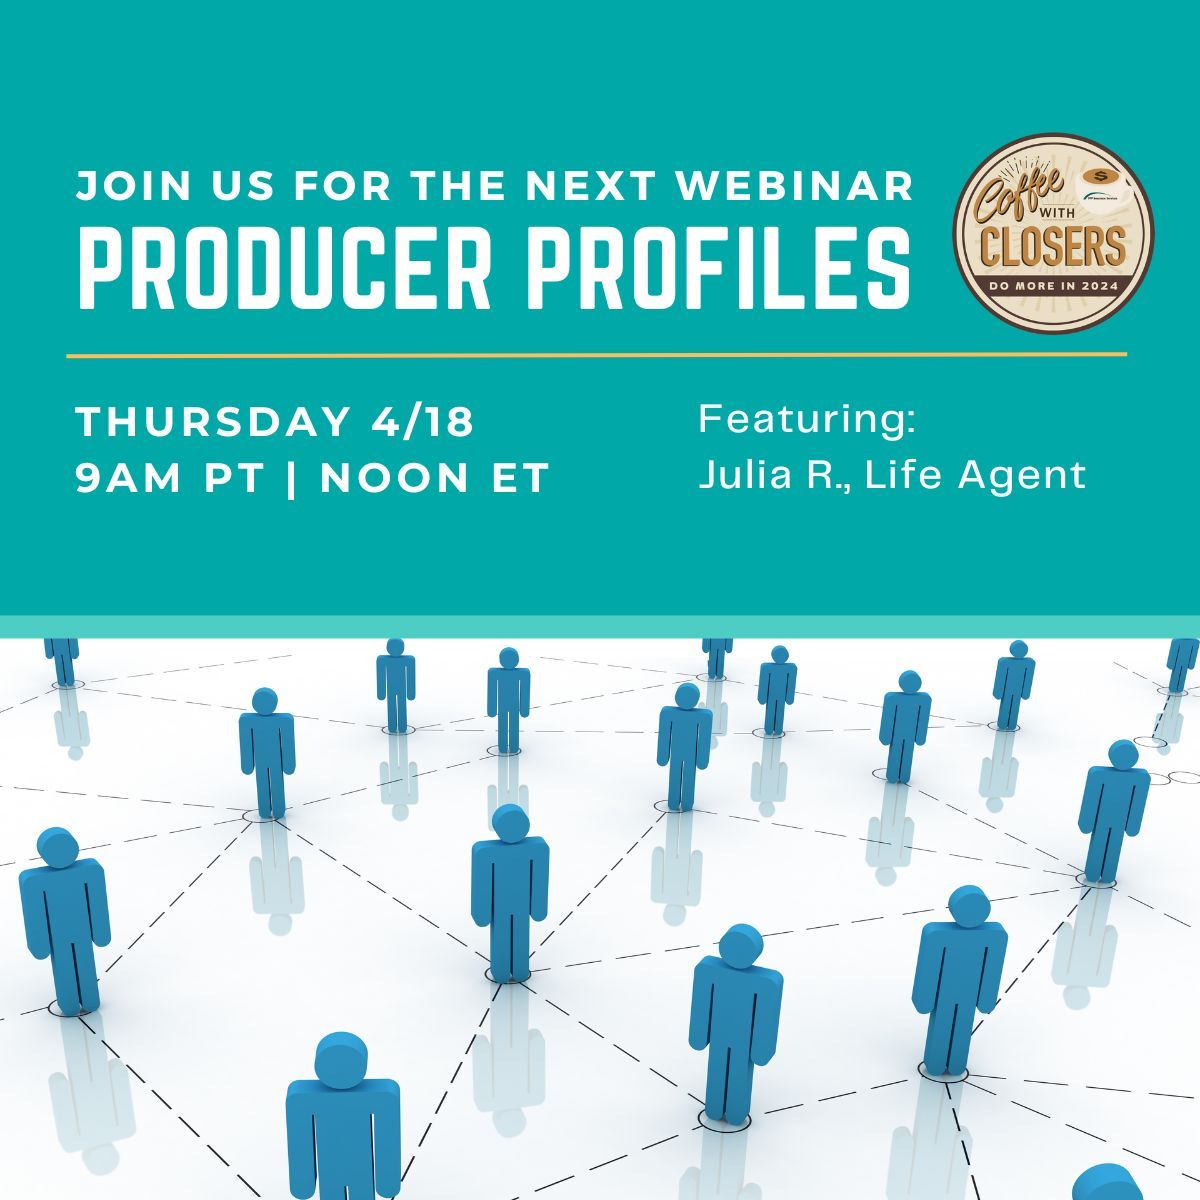 Join us this Thurs for the next #webinar in our #ProducerProfiles series. Julia R will share her success in attracting new clients and selling products to her existing base via social media. DM to sign up!

#FFP #coffeewithclosers #lifeinsurance #lifeagent #DoMorein2024